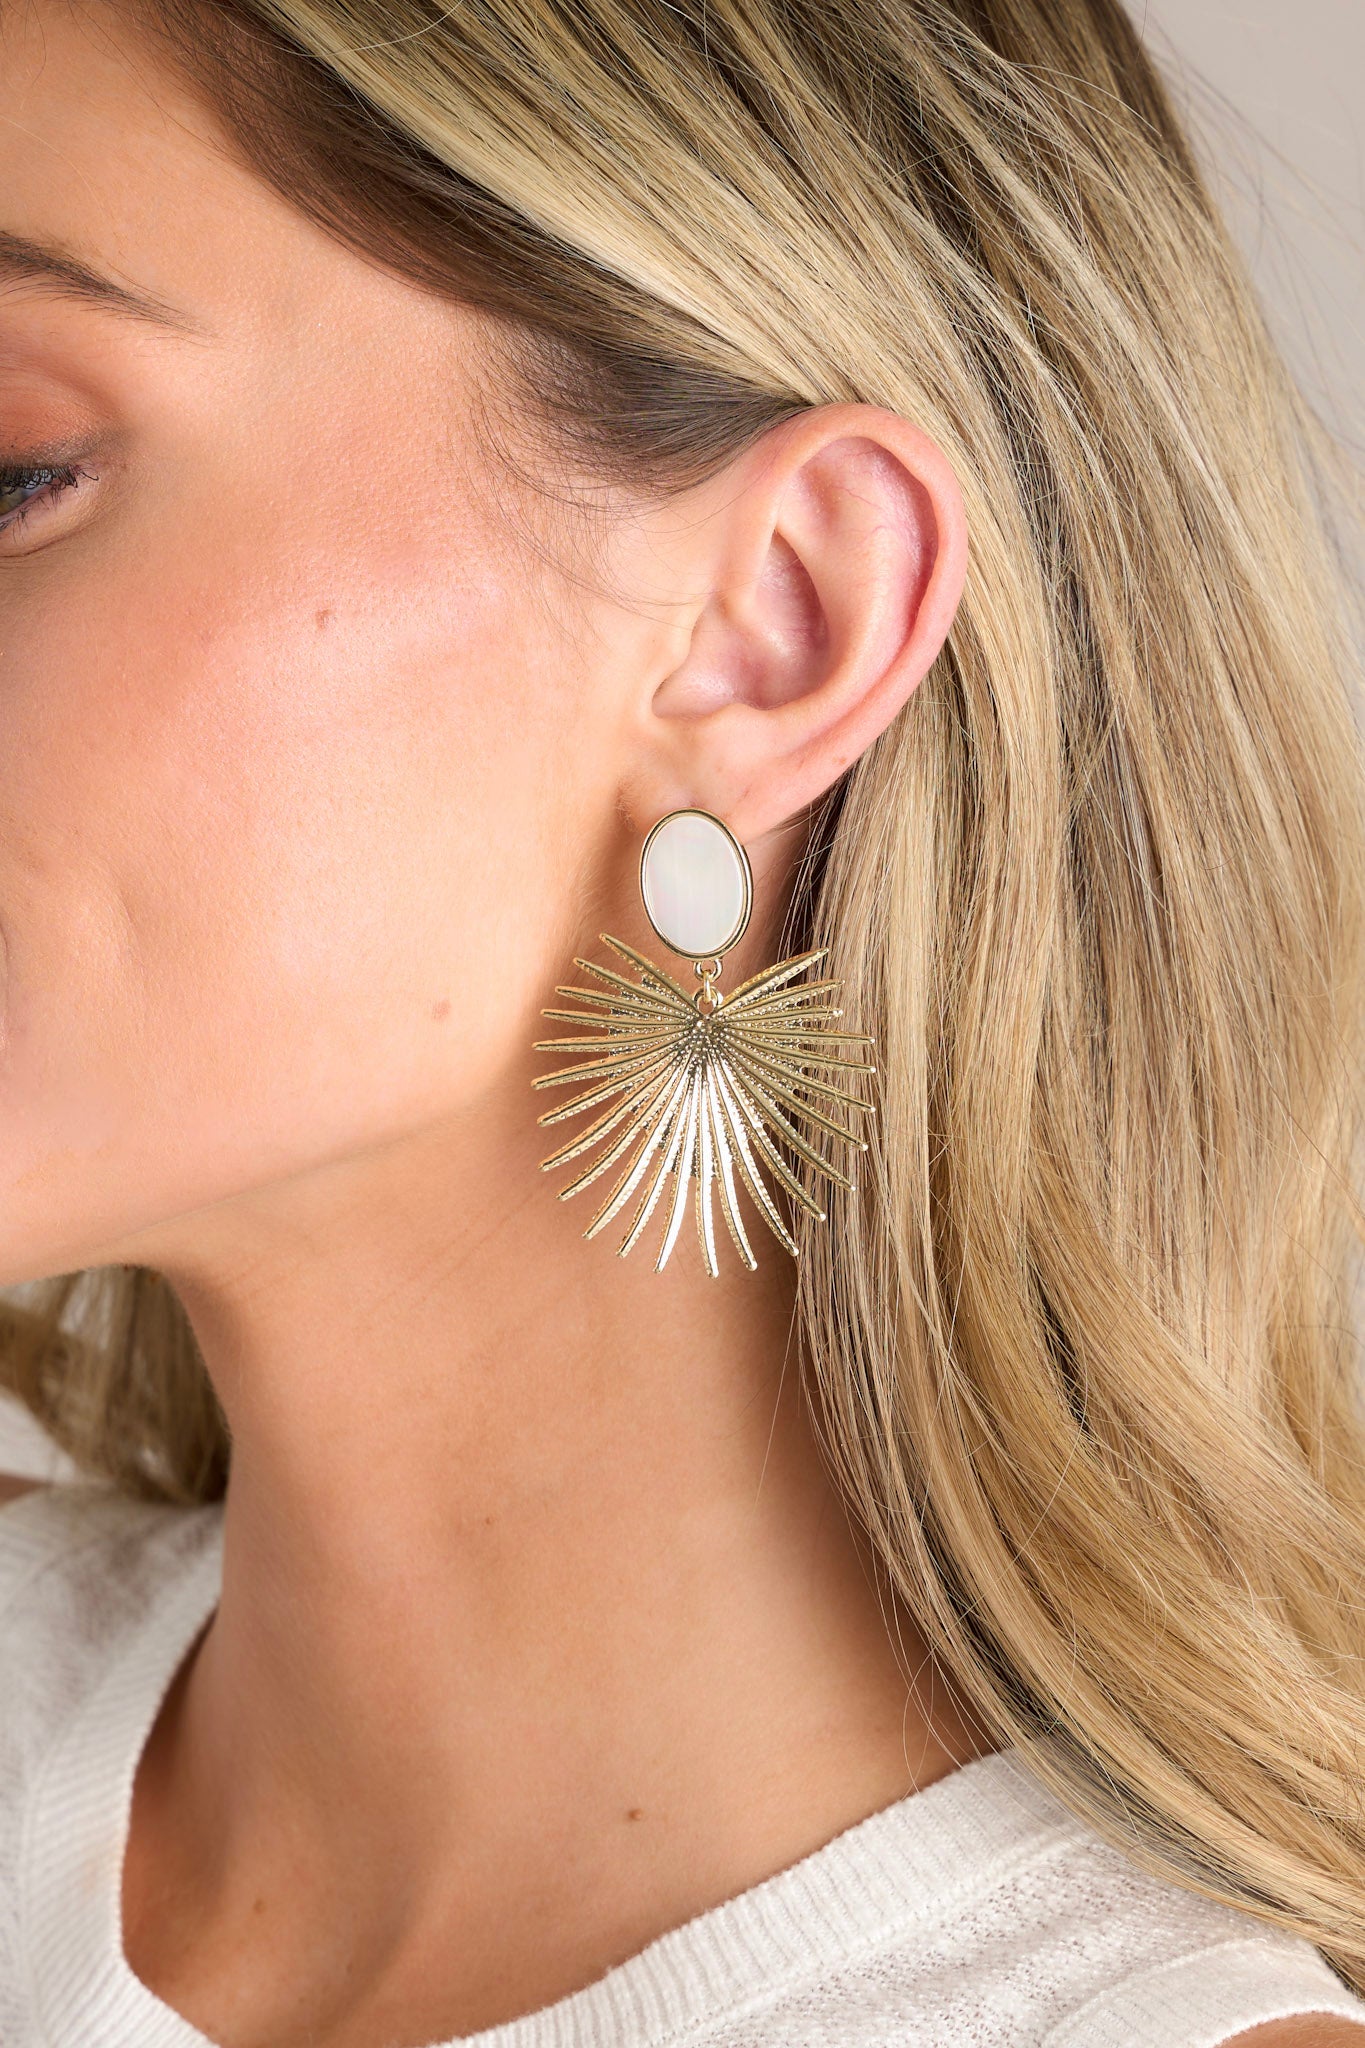 These gold earrings feature a faux opalescent stud, a gold statement drop, and secure post backings.